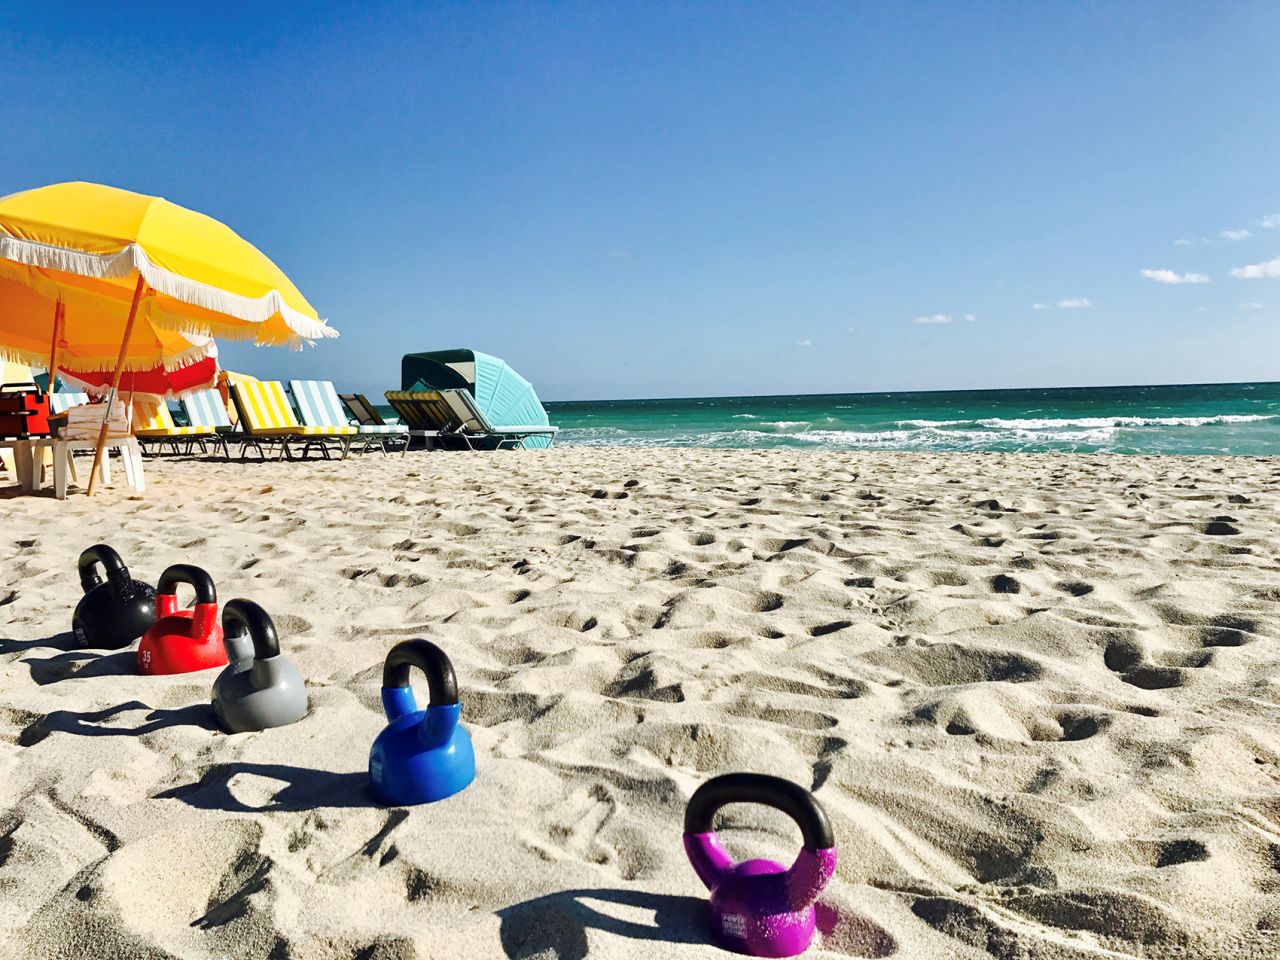 No place blends beach vacations and fitness bootcamps like Miami. The Confidante runs a string of fitness classes and camps -- both high-intensity workout classes and soothing yoga sessions -- on Miami Beach.